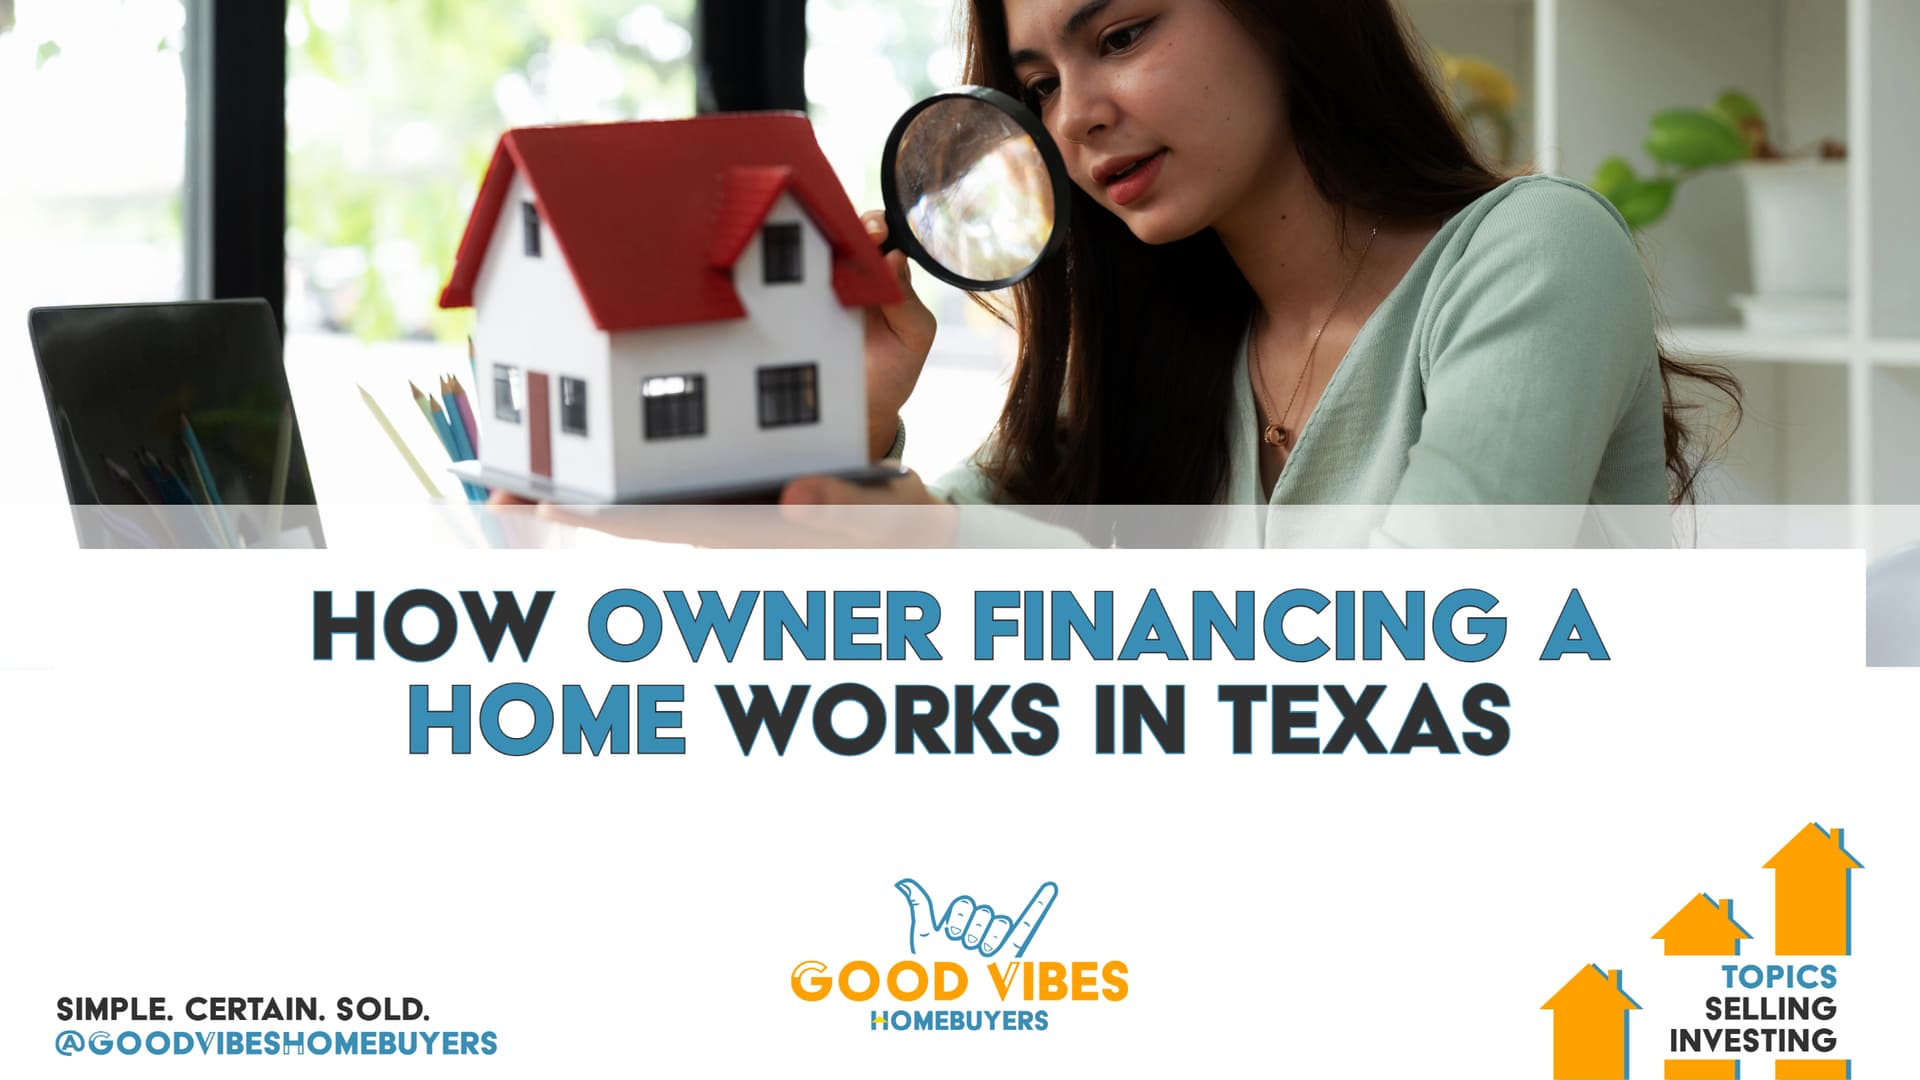 How Owner Financing a Home Works in Texas